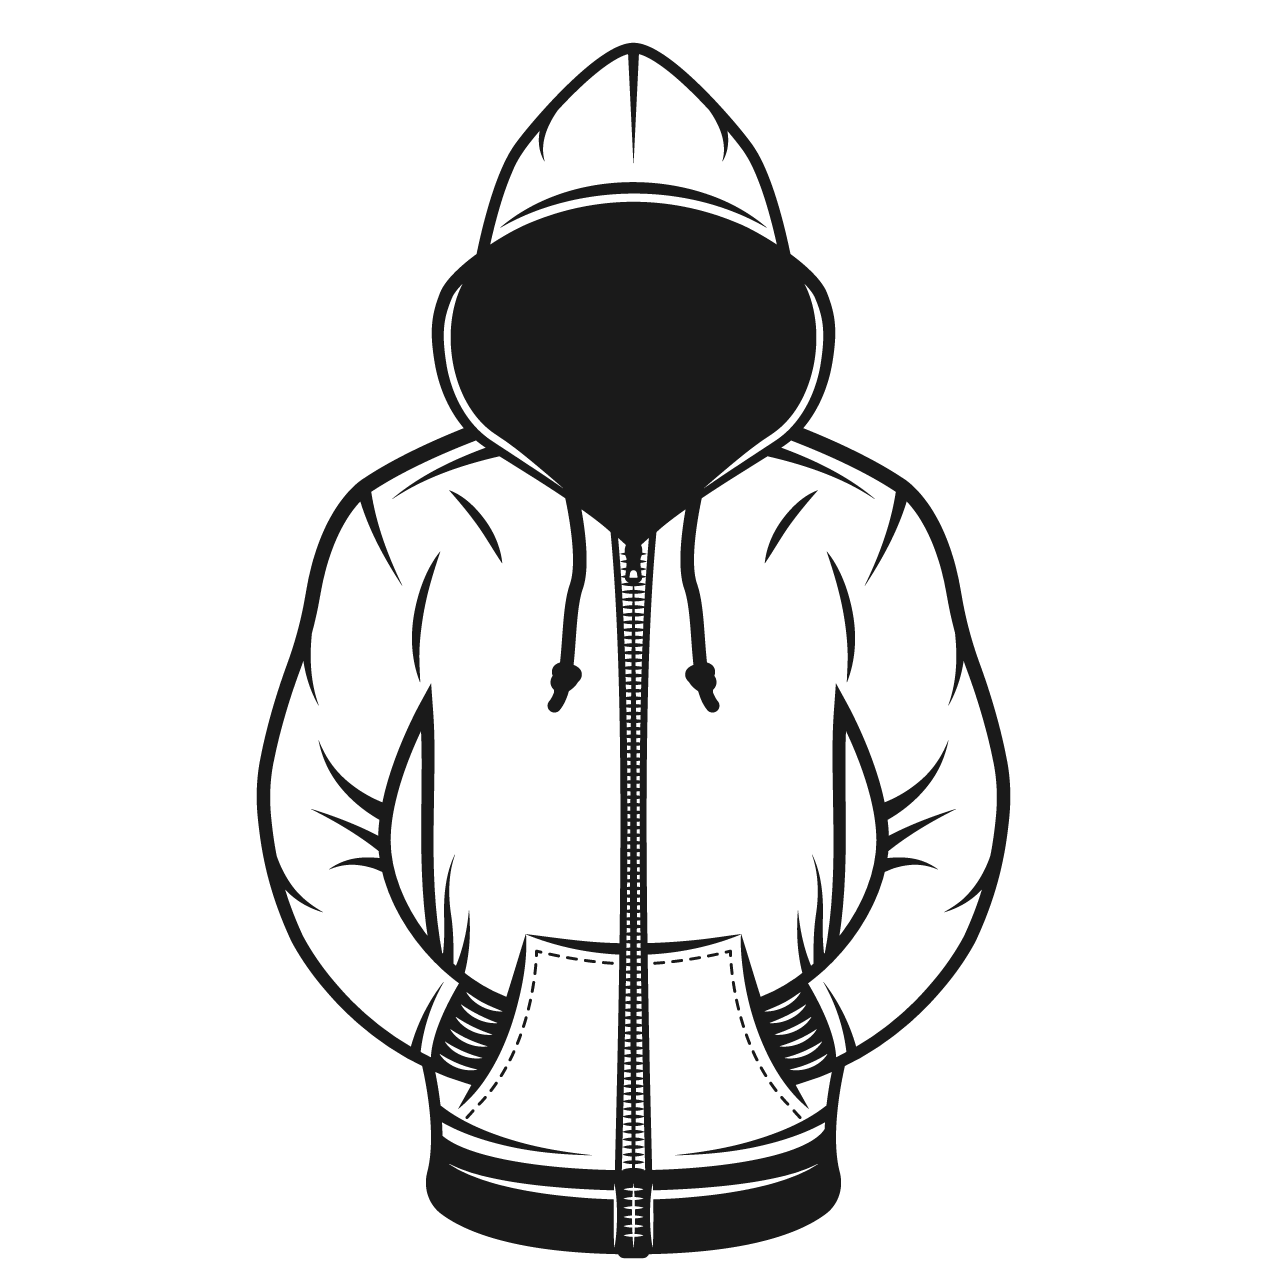 Hoodie clipart with blank face cartoon illustration transparent background image